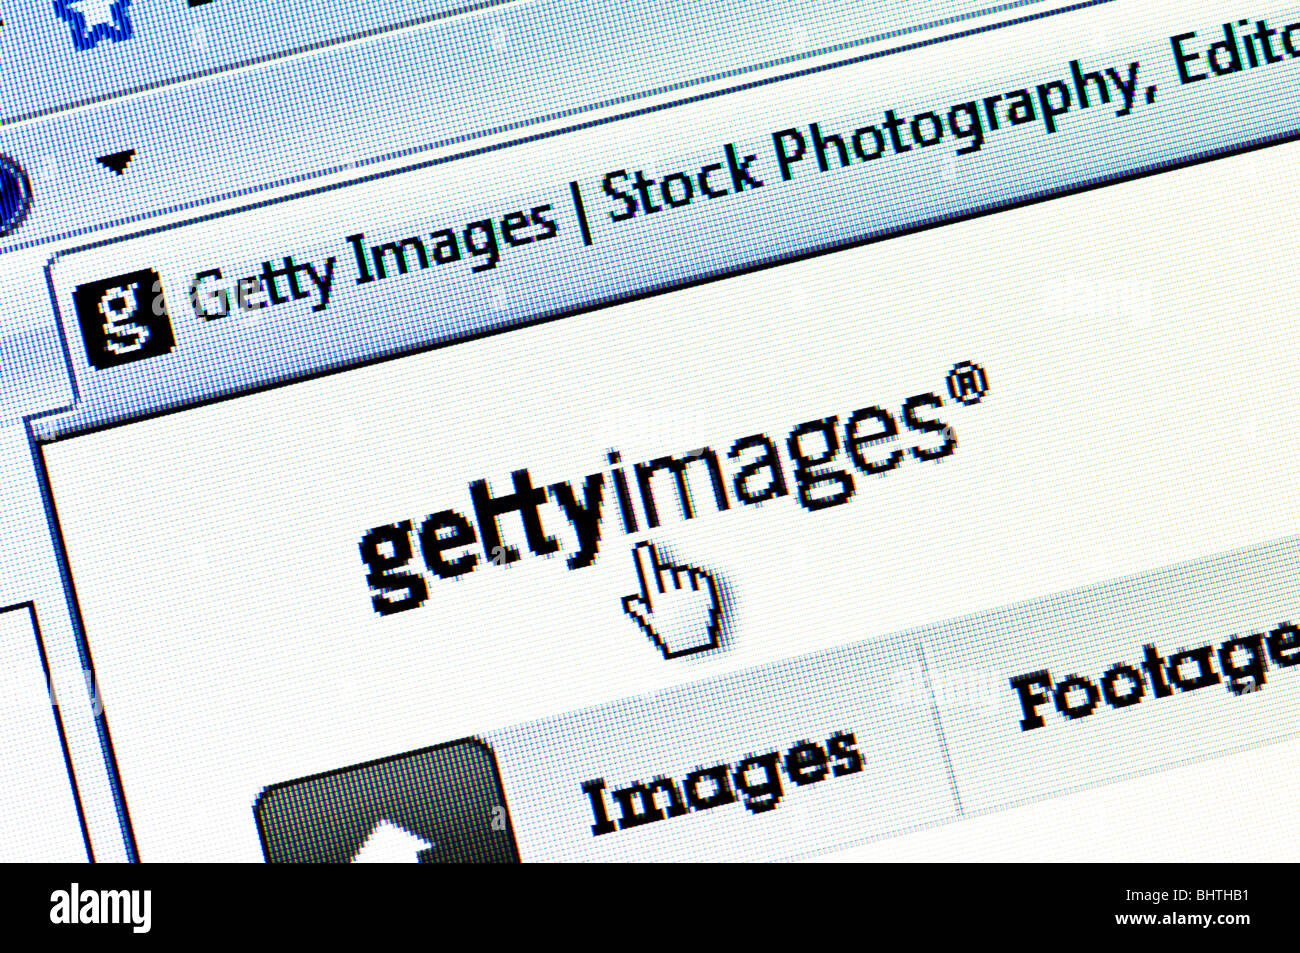 Macro screenshot of the Getty Images website. Getty sells and distributes photography and film footage. Editorial use only. Stock Photo